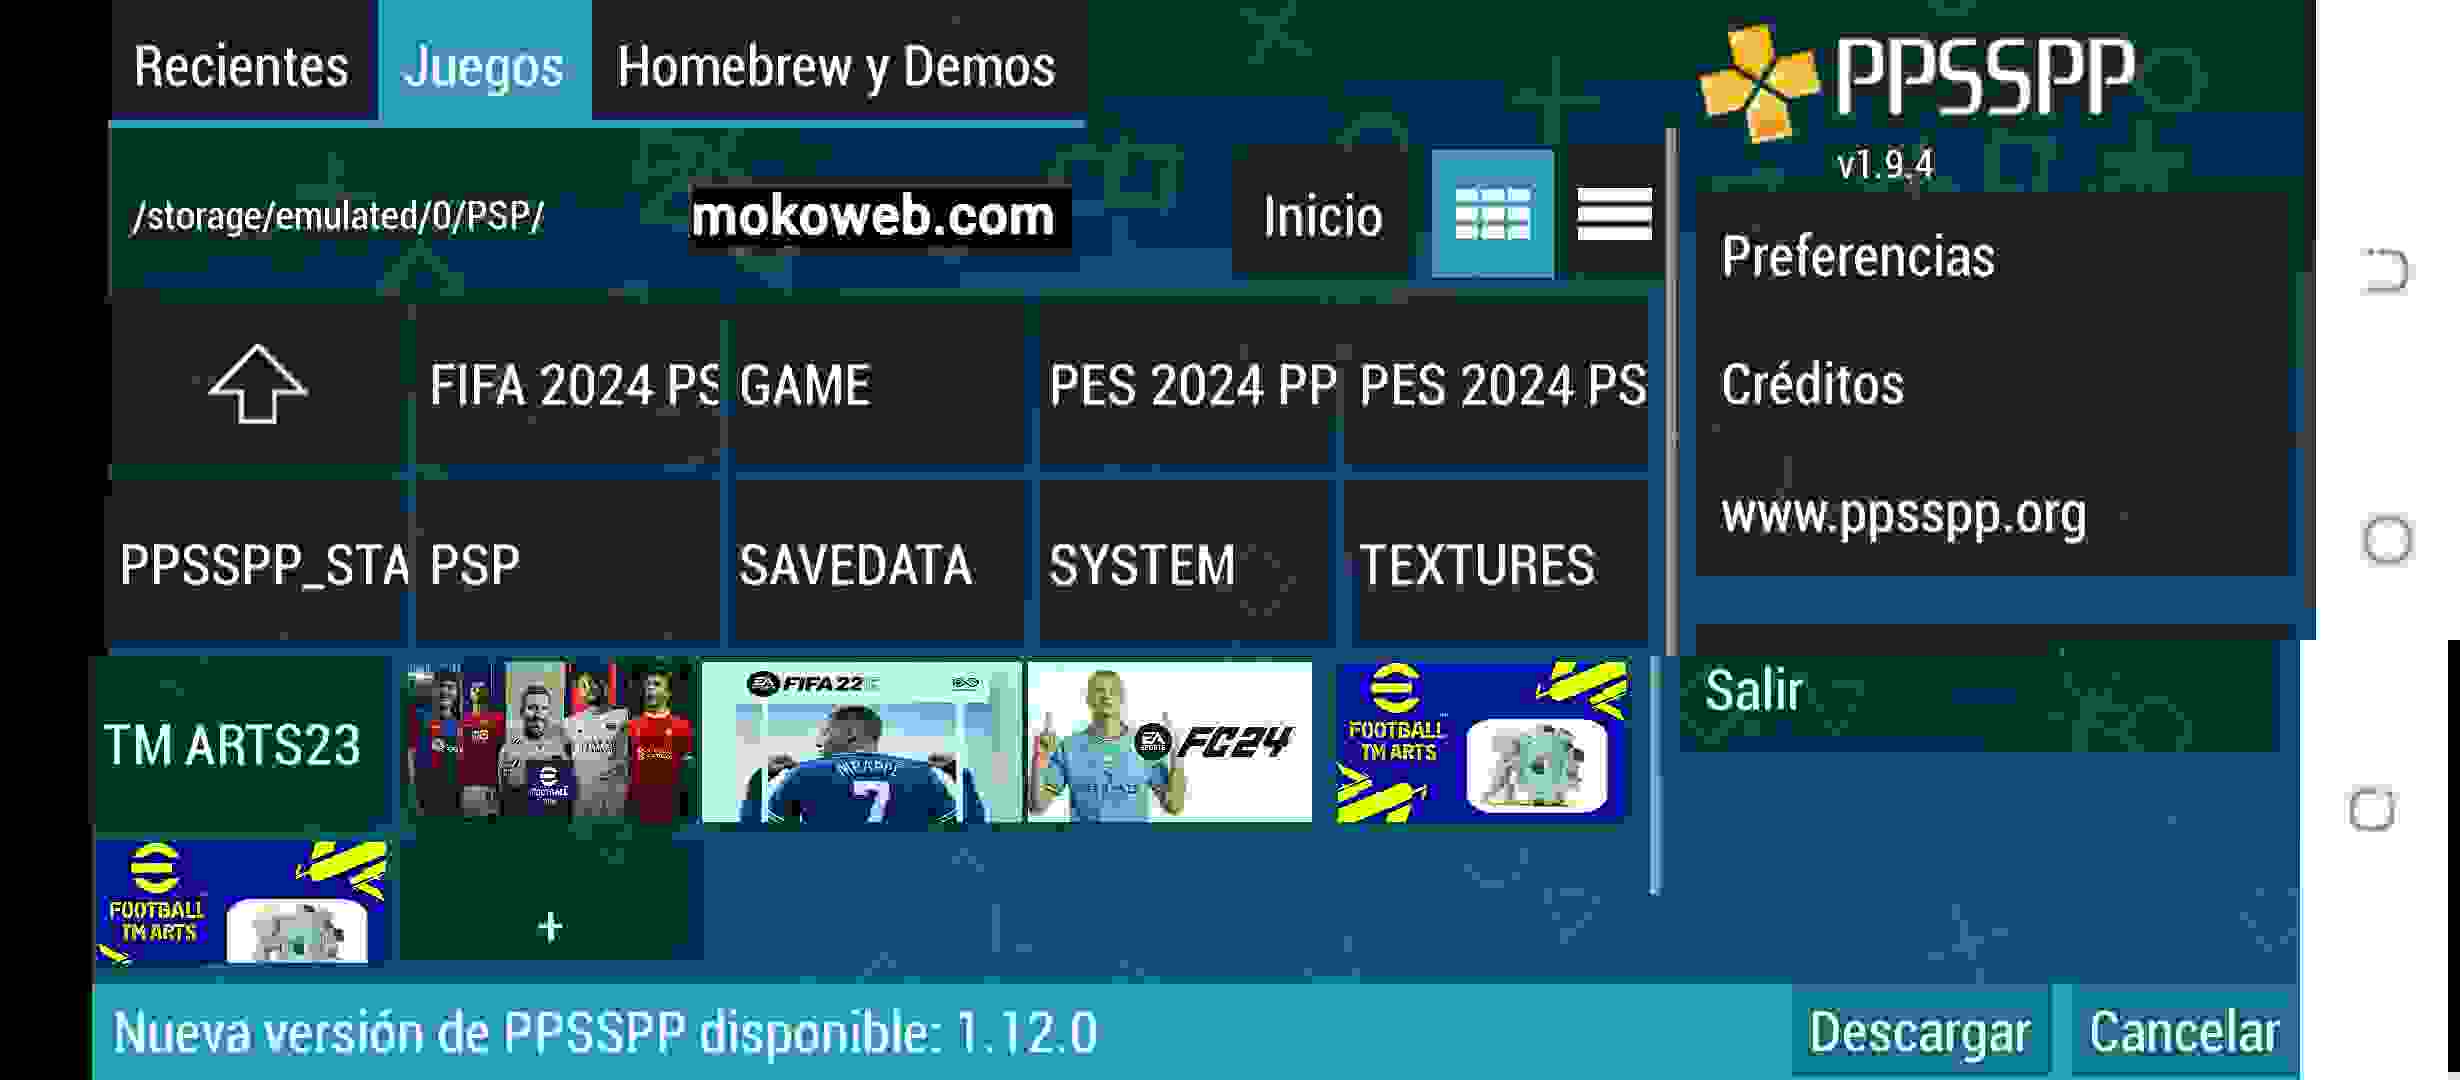 FIFA 2024 PPSSPP (Fifa 24 psp) iSO Game File Download (Highly